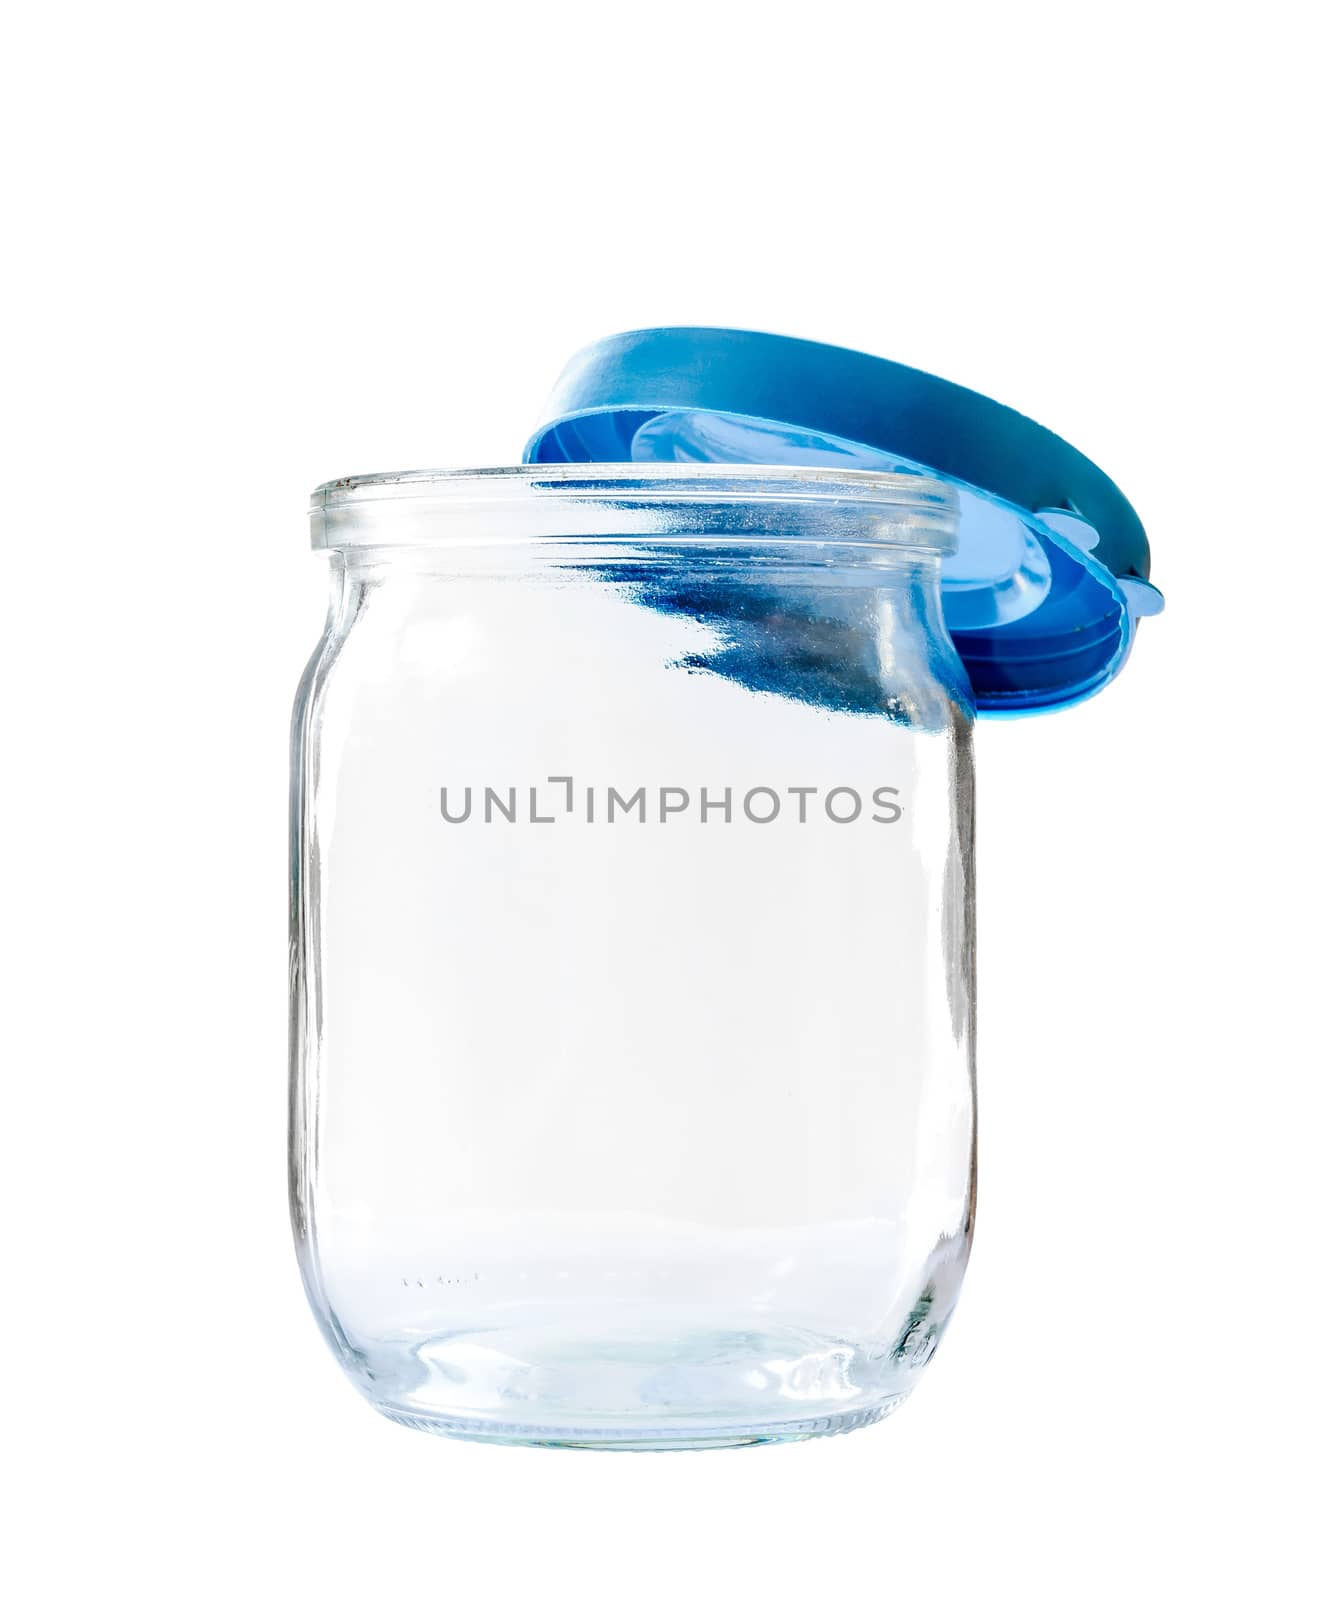 Transparent glass jar on white background, with the open plastic blue top